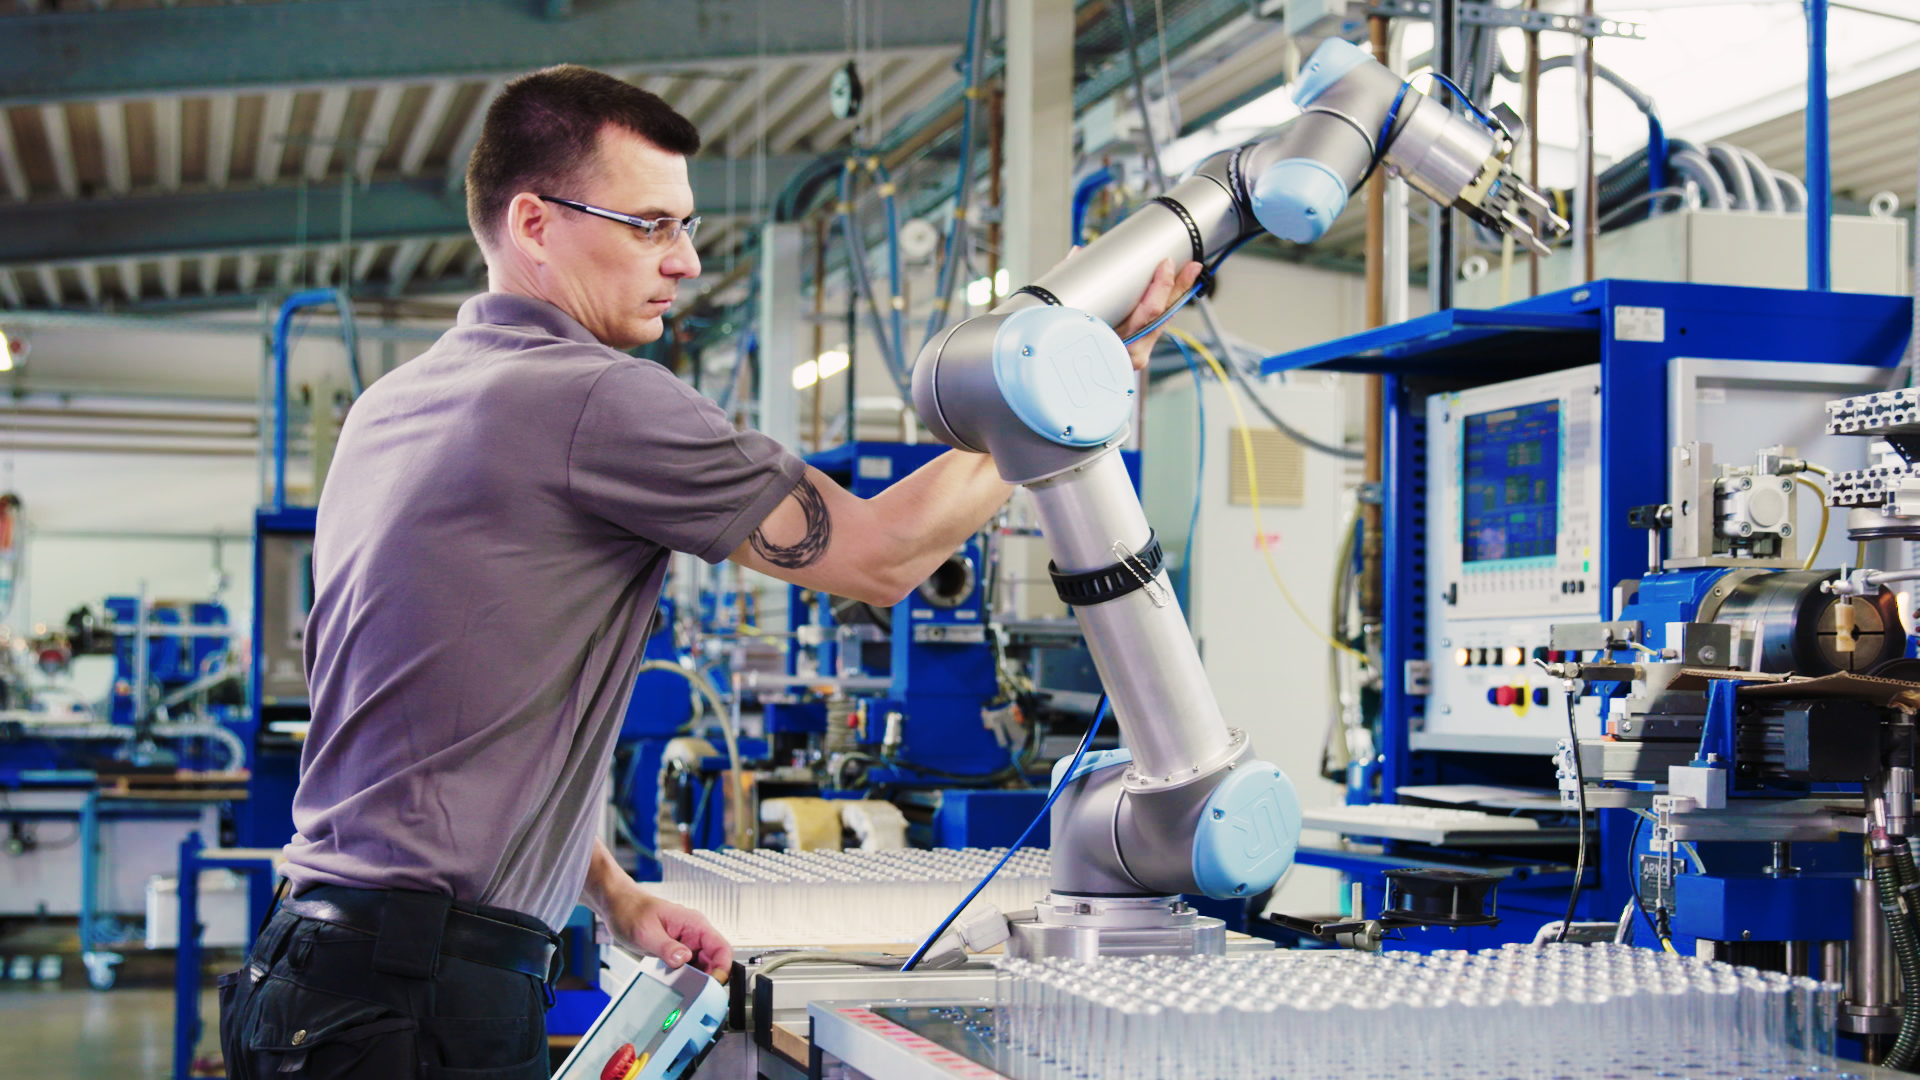 Cobots don't replace employees, they cooperate with them. Photo: Müller Maschinentechnik